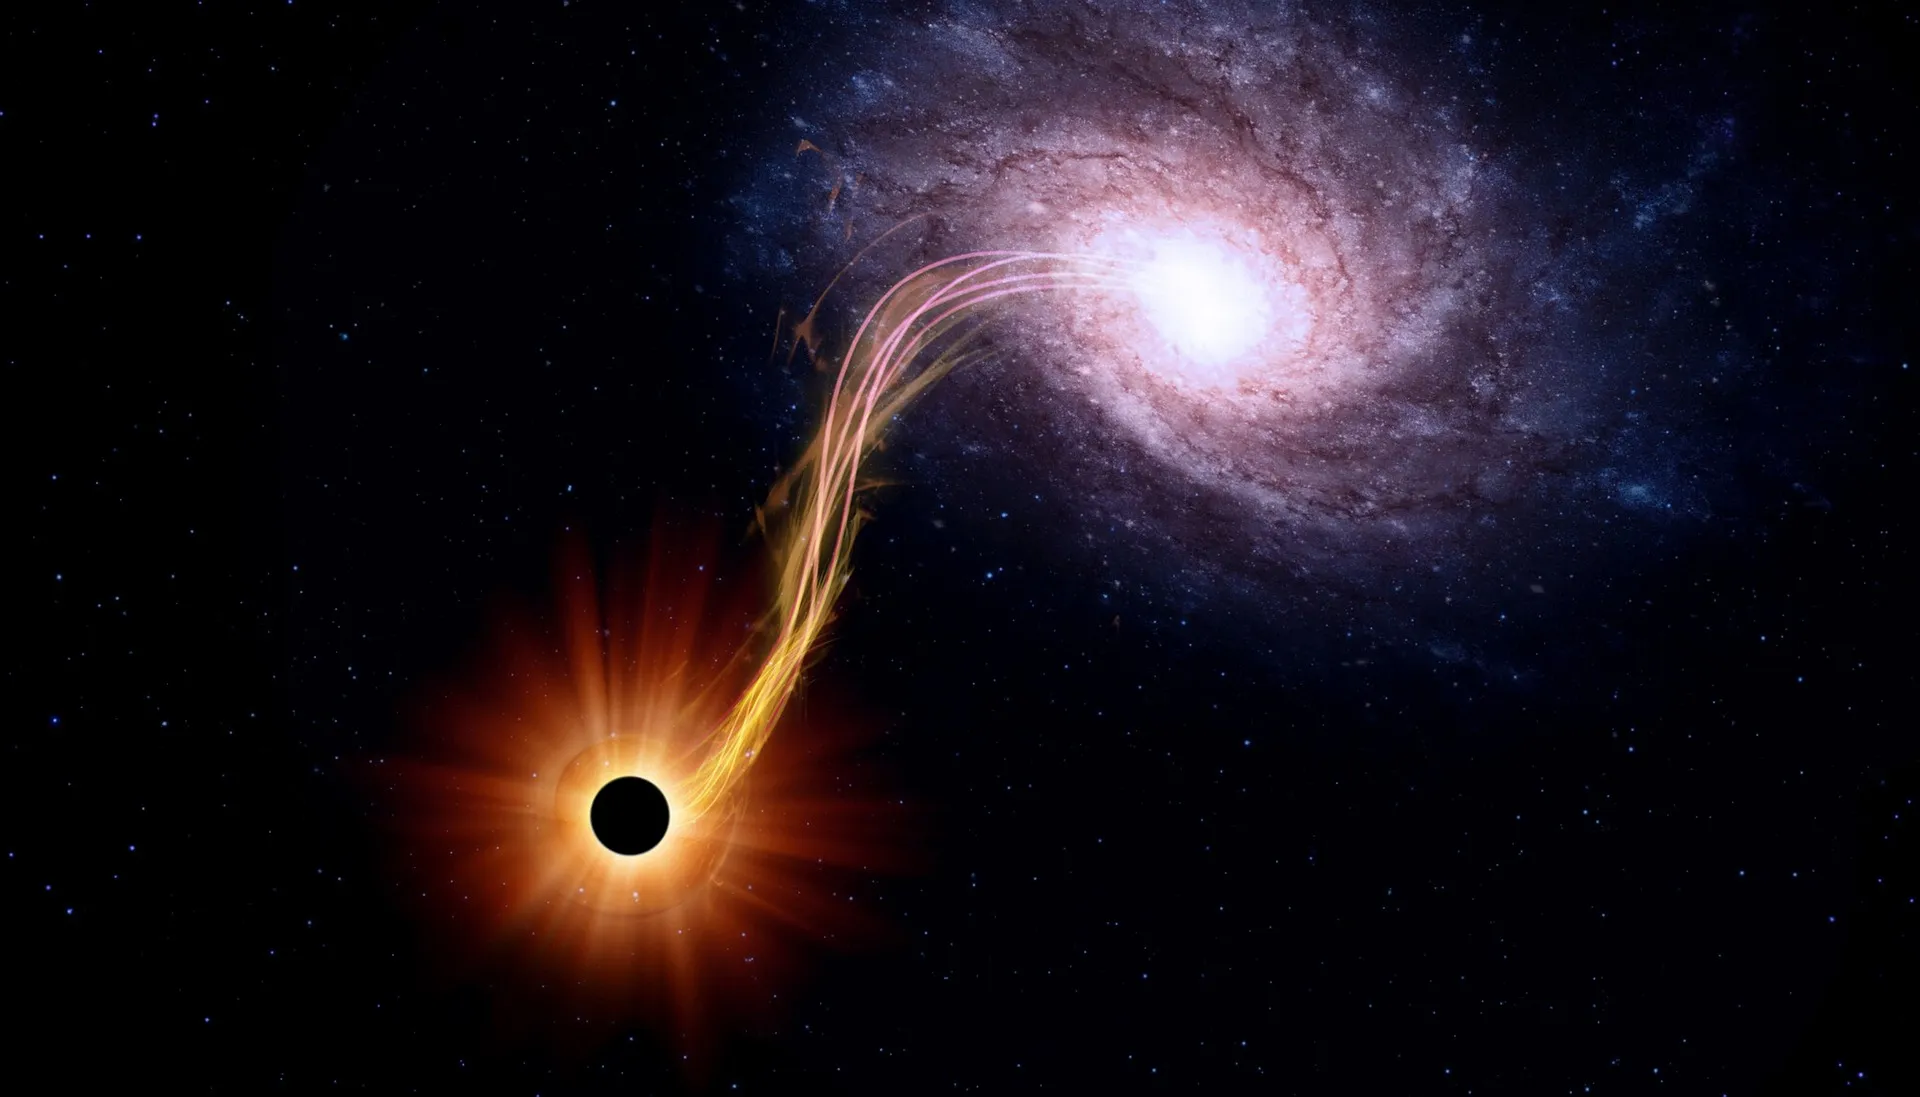 A black hole and star depicted in an artist's rendering, exploring the role of white dwarfs and black holes in supernovae.